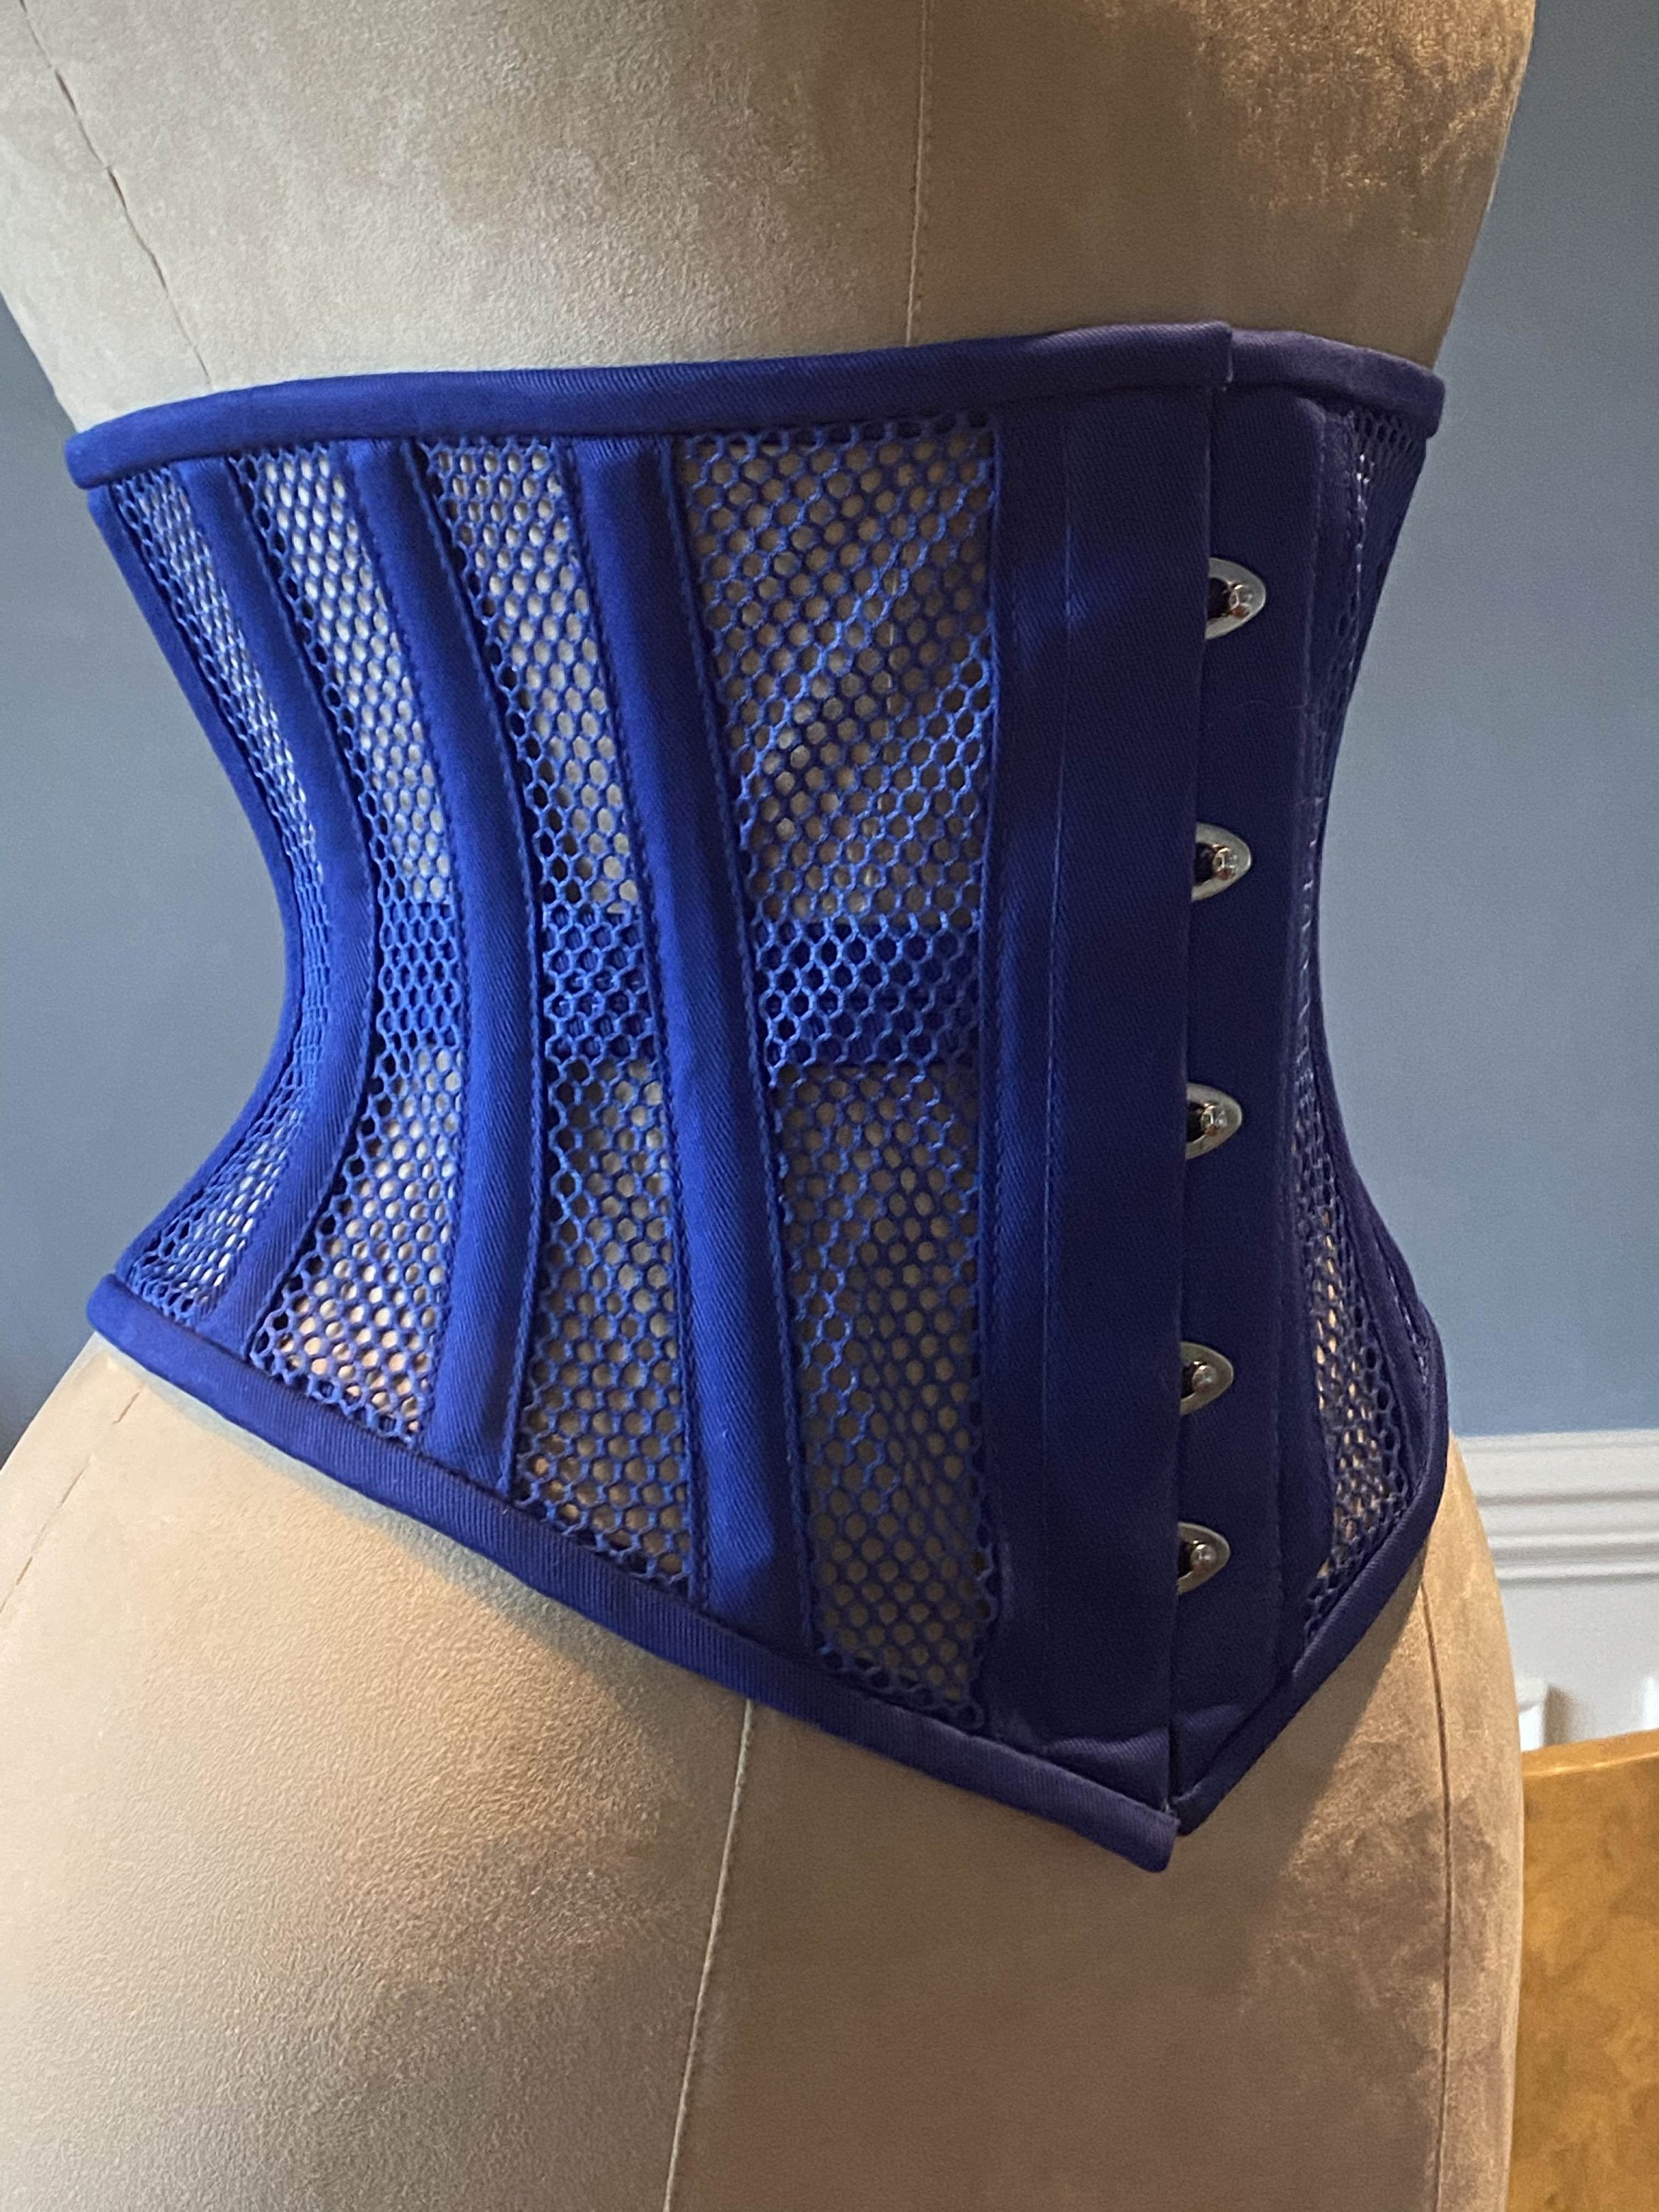 Real steel boned underbust corset from blue transparent mesh and cotton.  Real waist training corset for tight lacing.